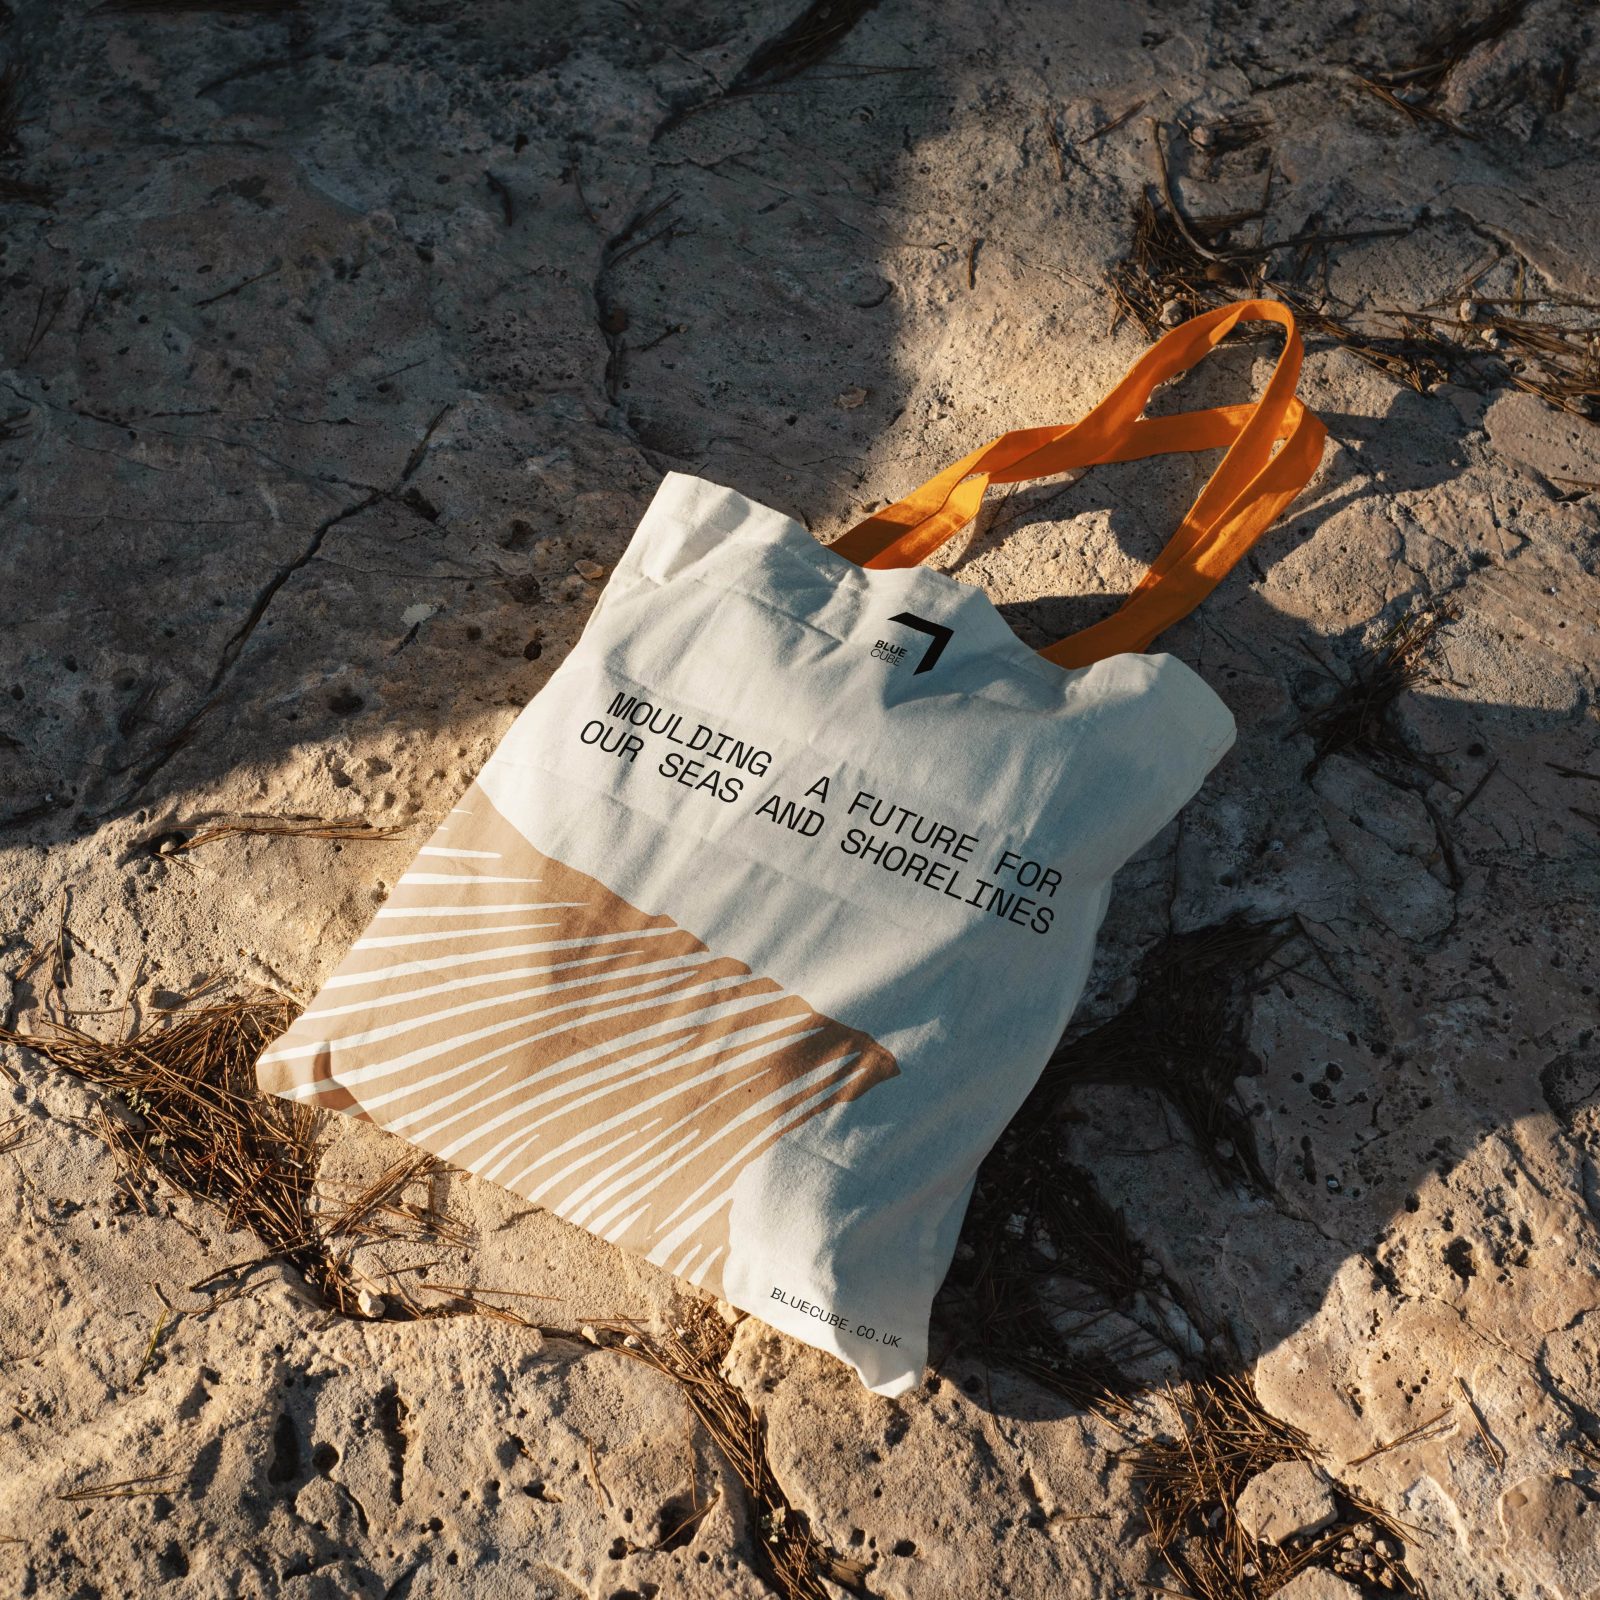 A canvas tote bag with orange handles and brand design about cleaning seas lies on a rocky surface under sunlight, casting a shadow.